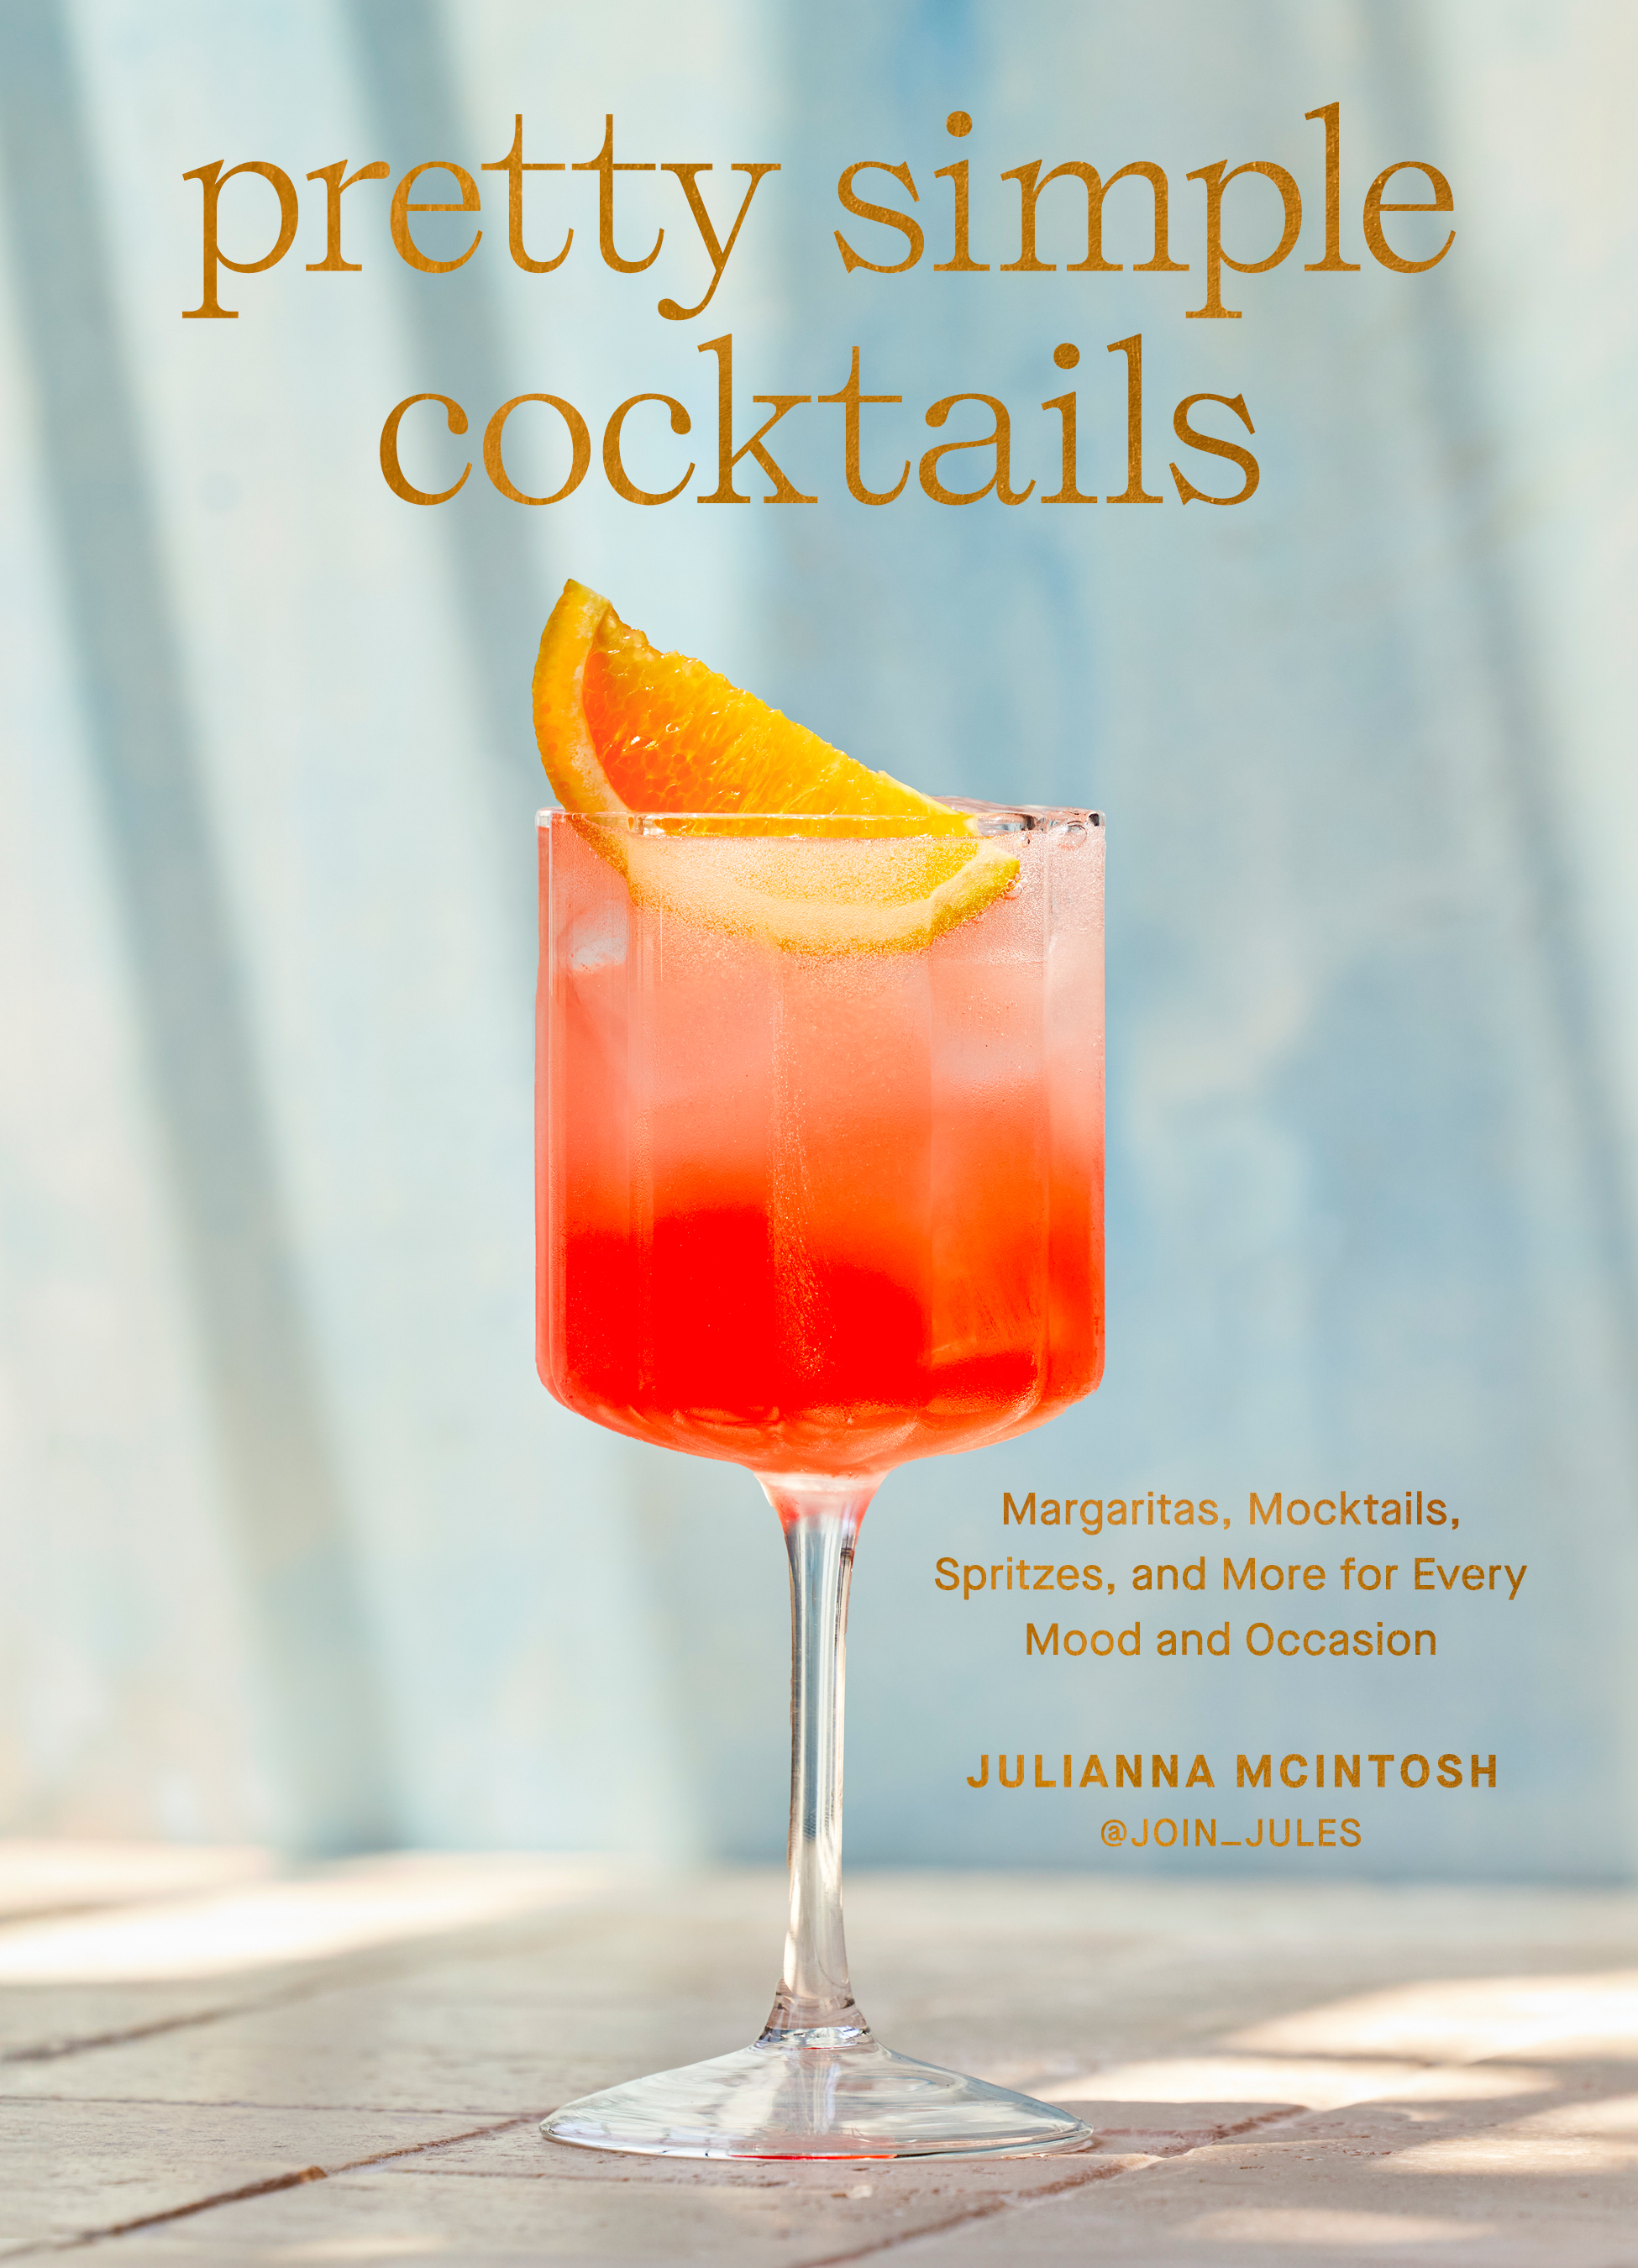 Pretty Simple Cocktails by Julianna McIntosh, mixologist and cocktail blogger with the handle @join_jules, is set to debut July 23. (Courtesy Clarkson Potter)